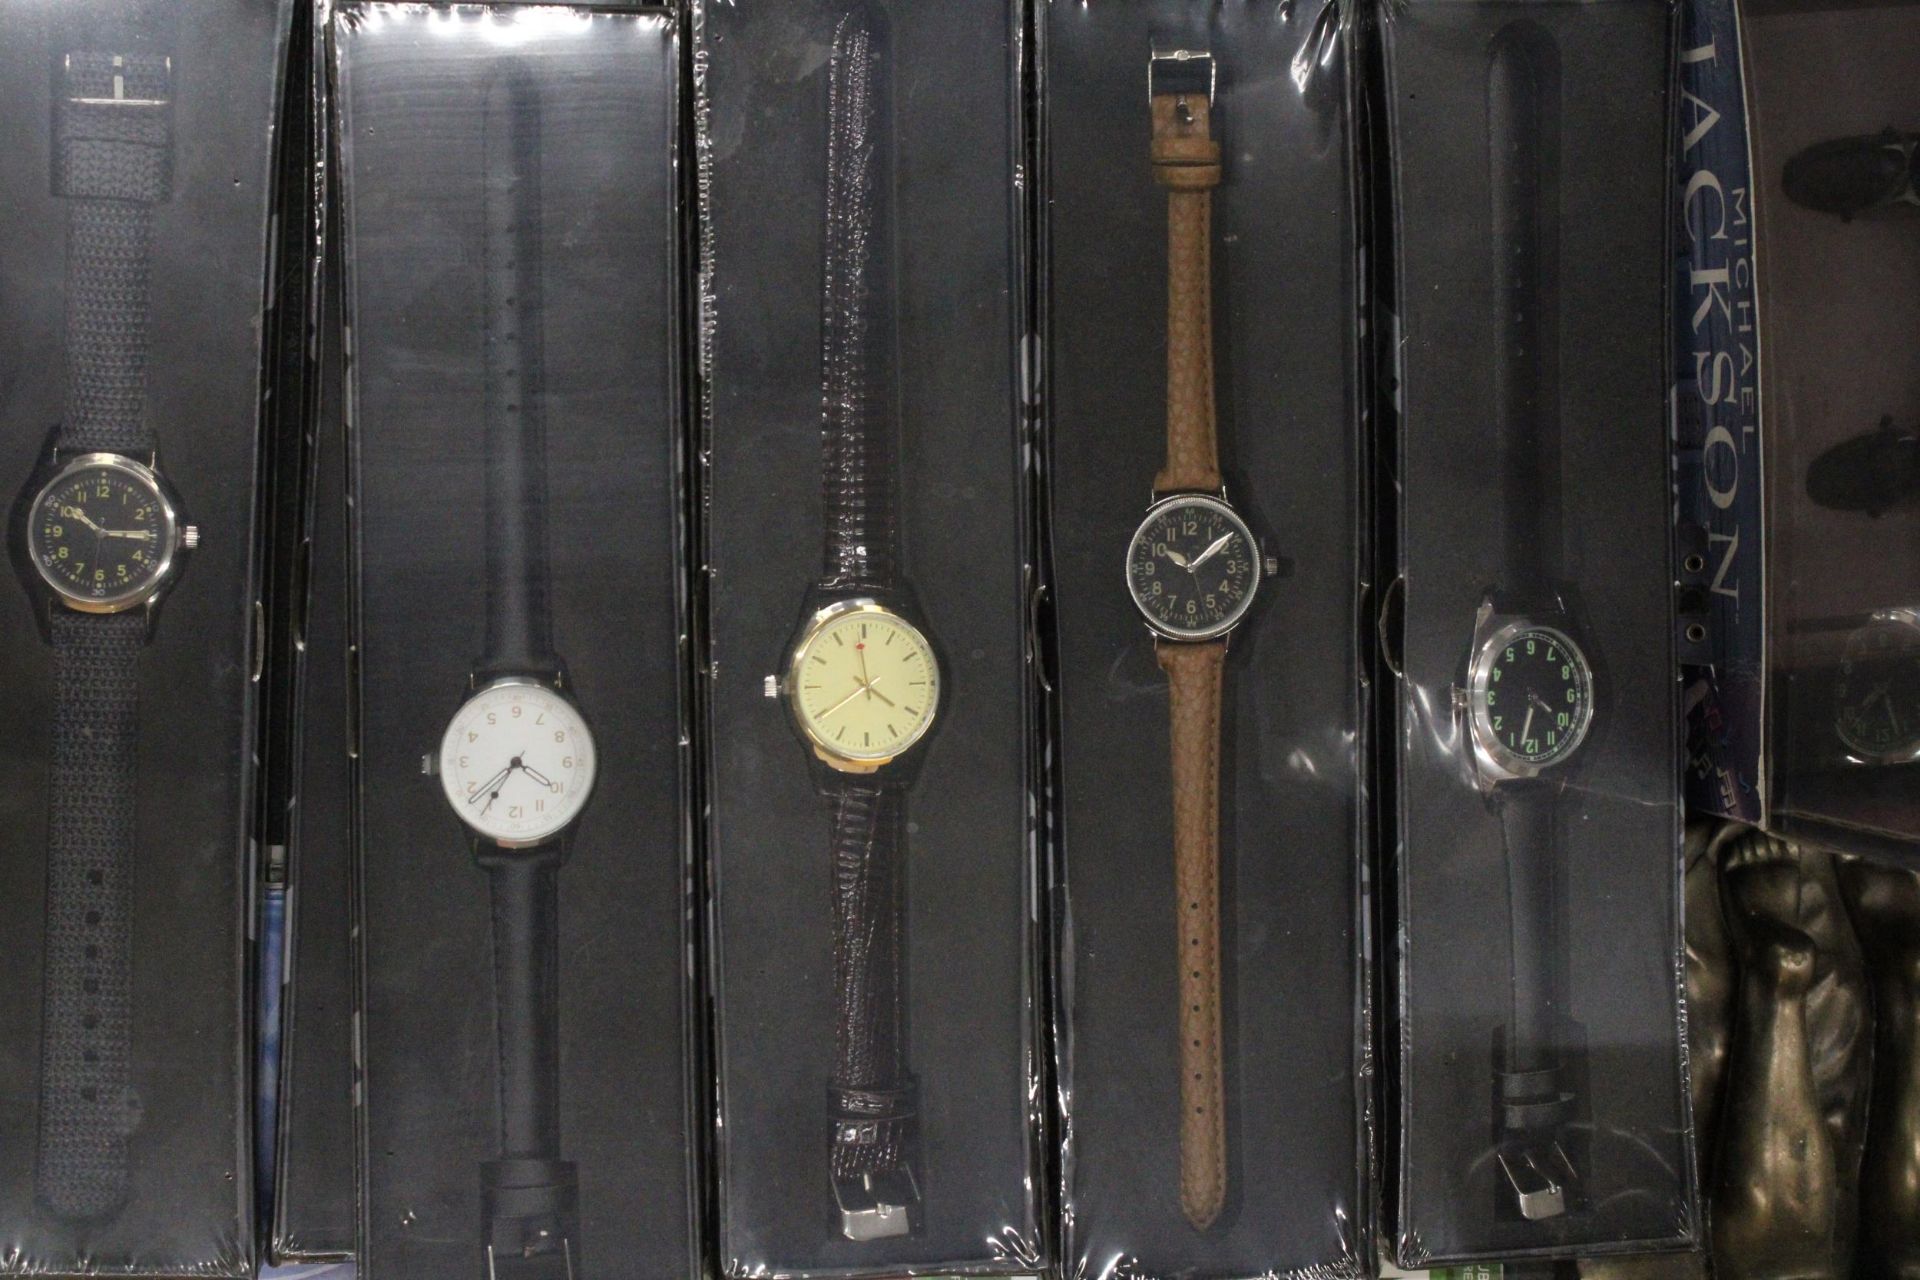 A SELECTION OF MILITARIAN WATCHES TOGETHER WITH A COLLECTION OF MILITARY WATCH MAGAZINES - Image 3 of 6